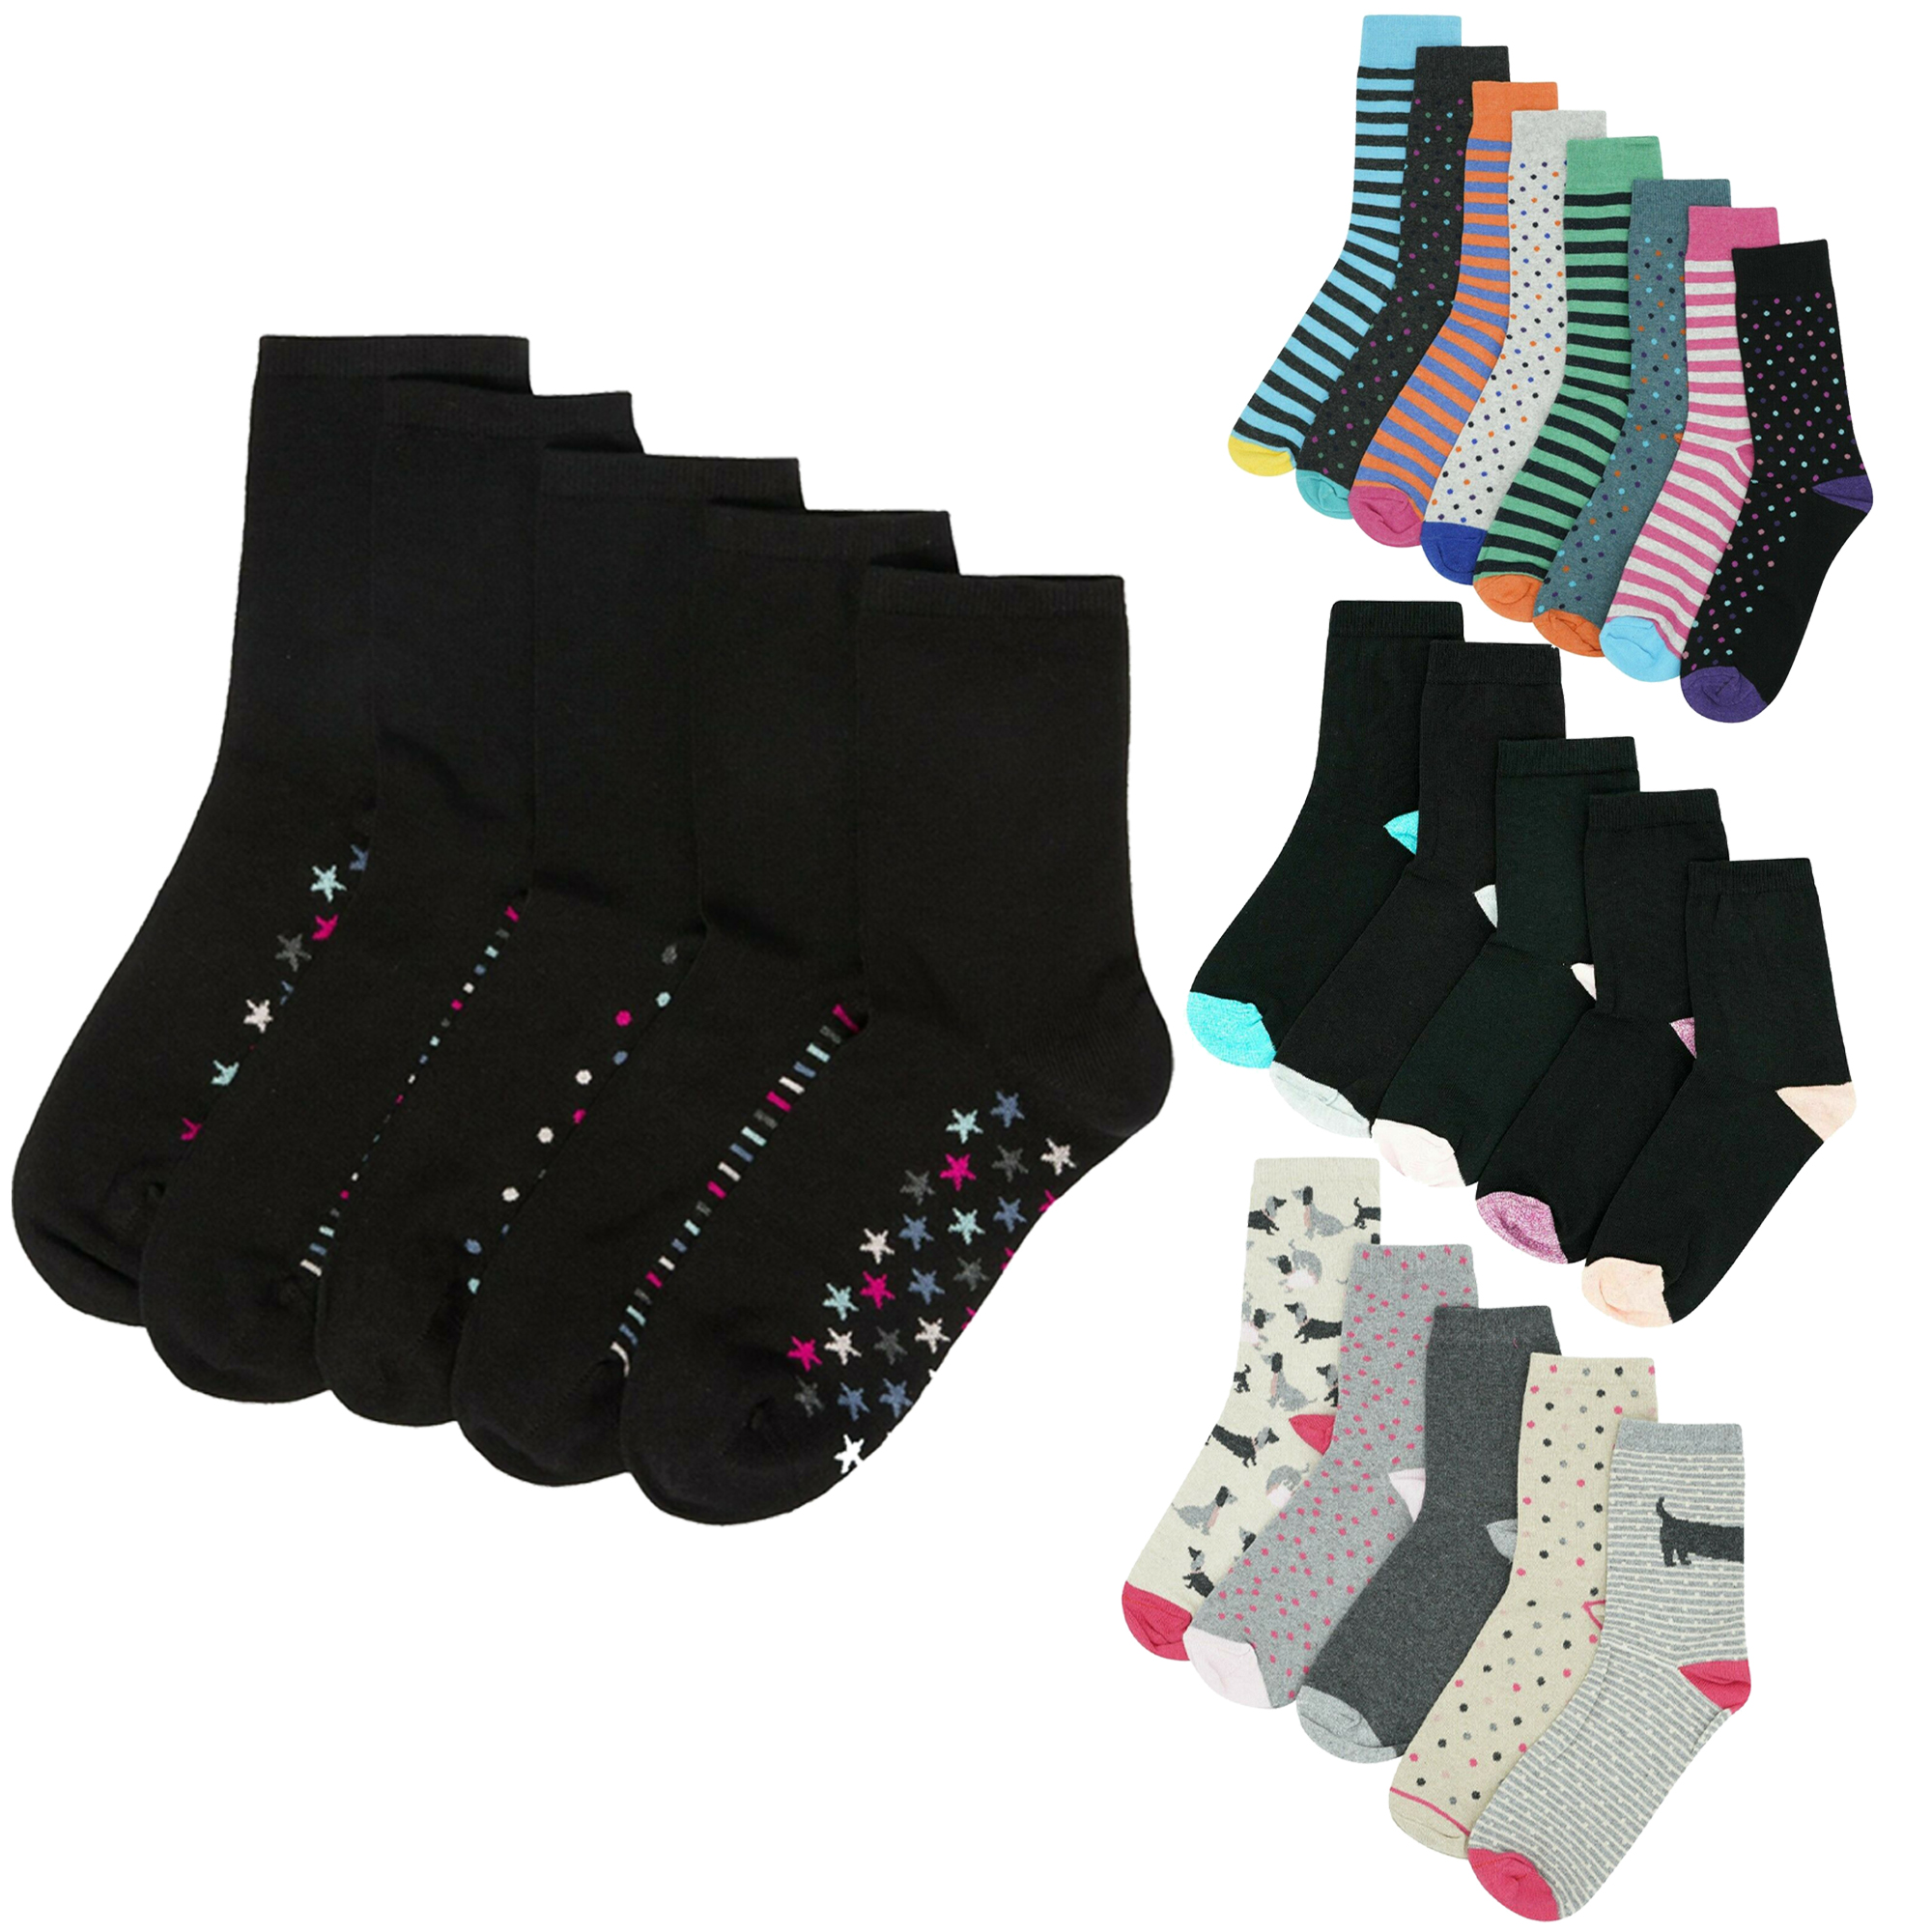 M & S Women's Socks Pack of 5 Ladies Cotton Rich Multipack Soft Combo ...